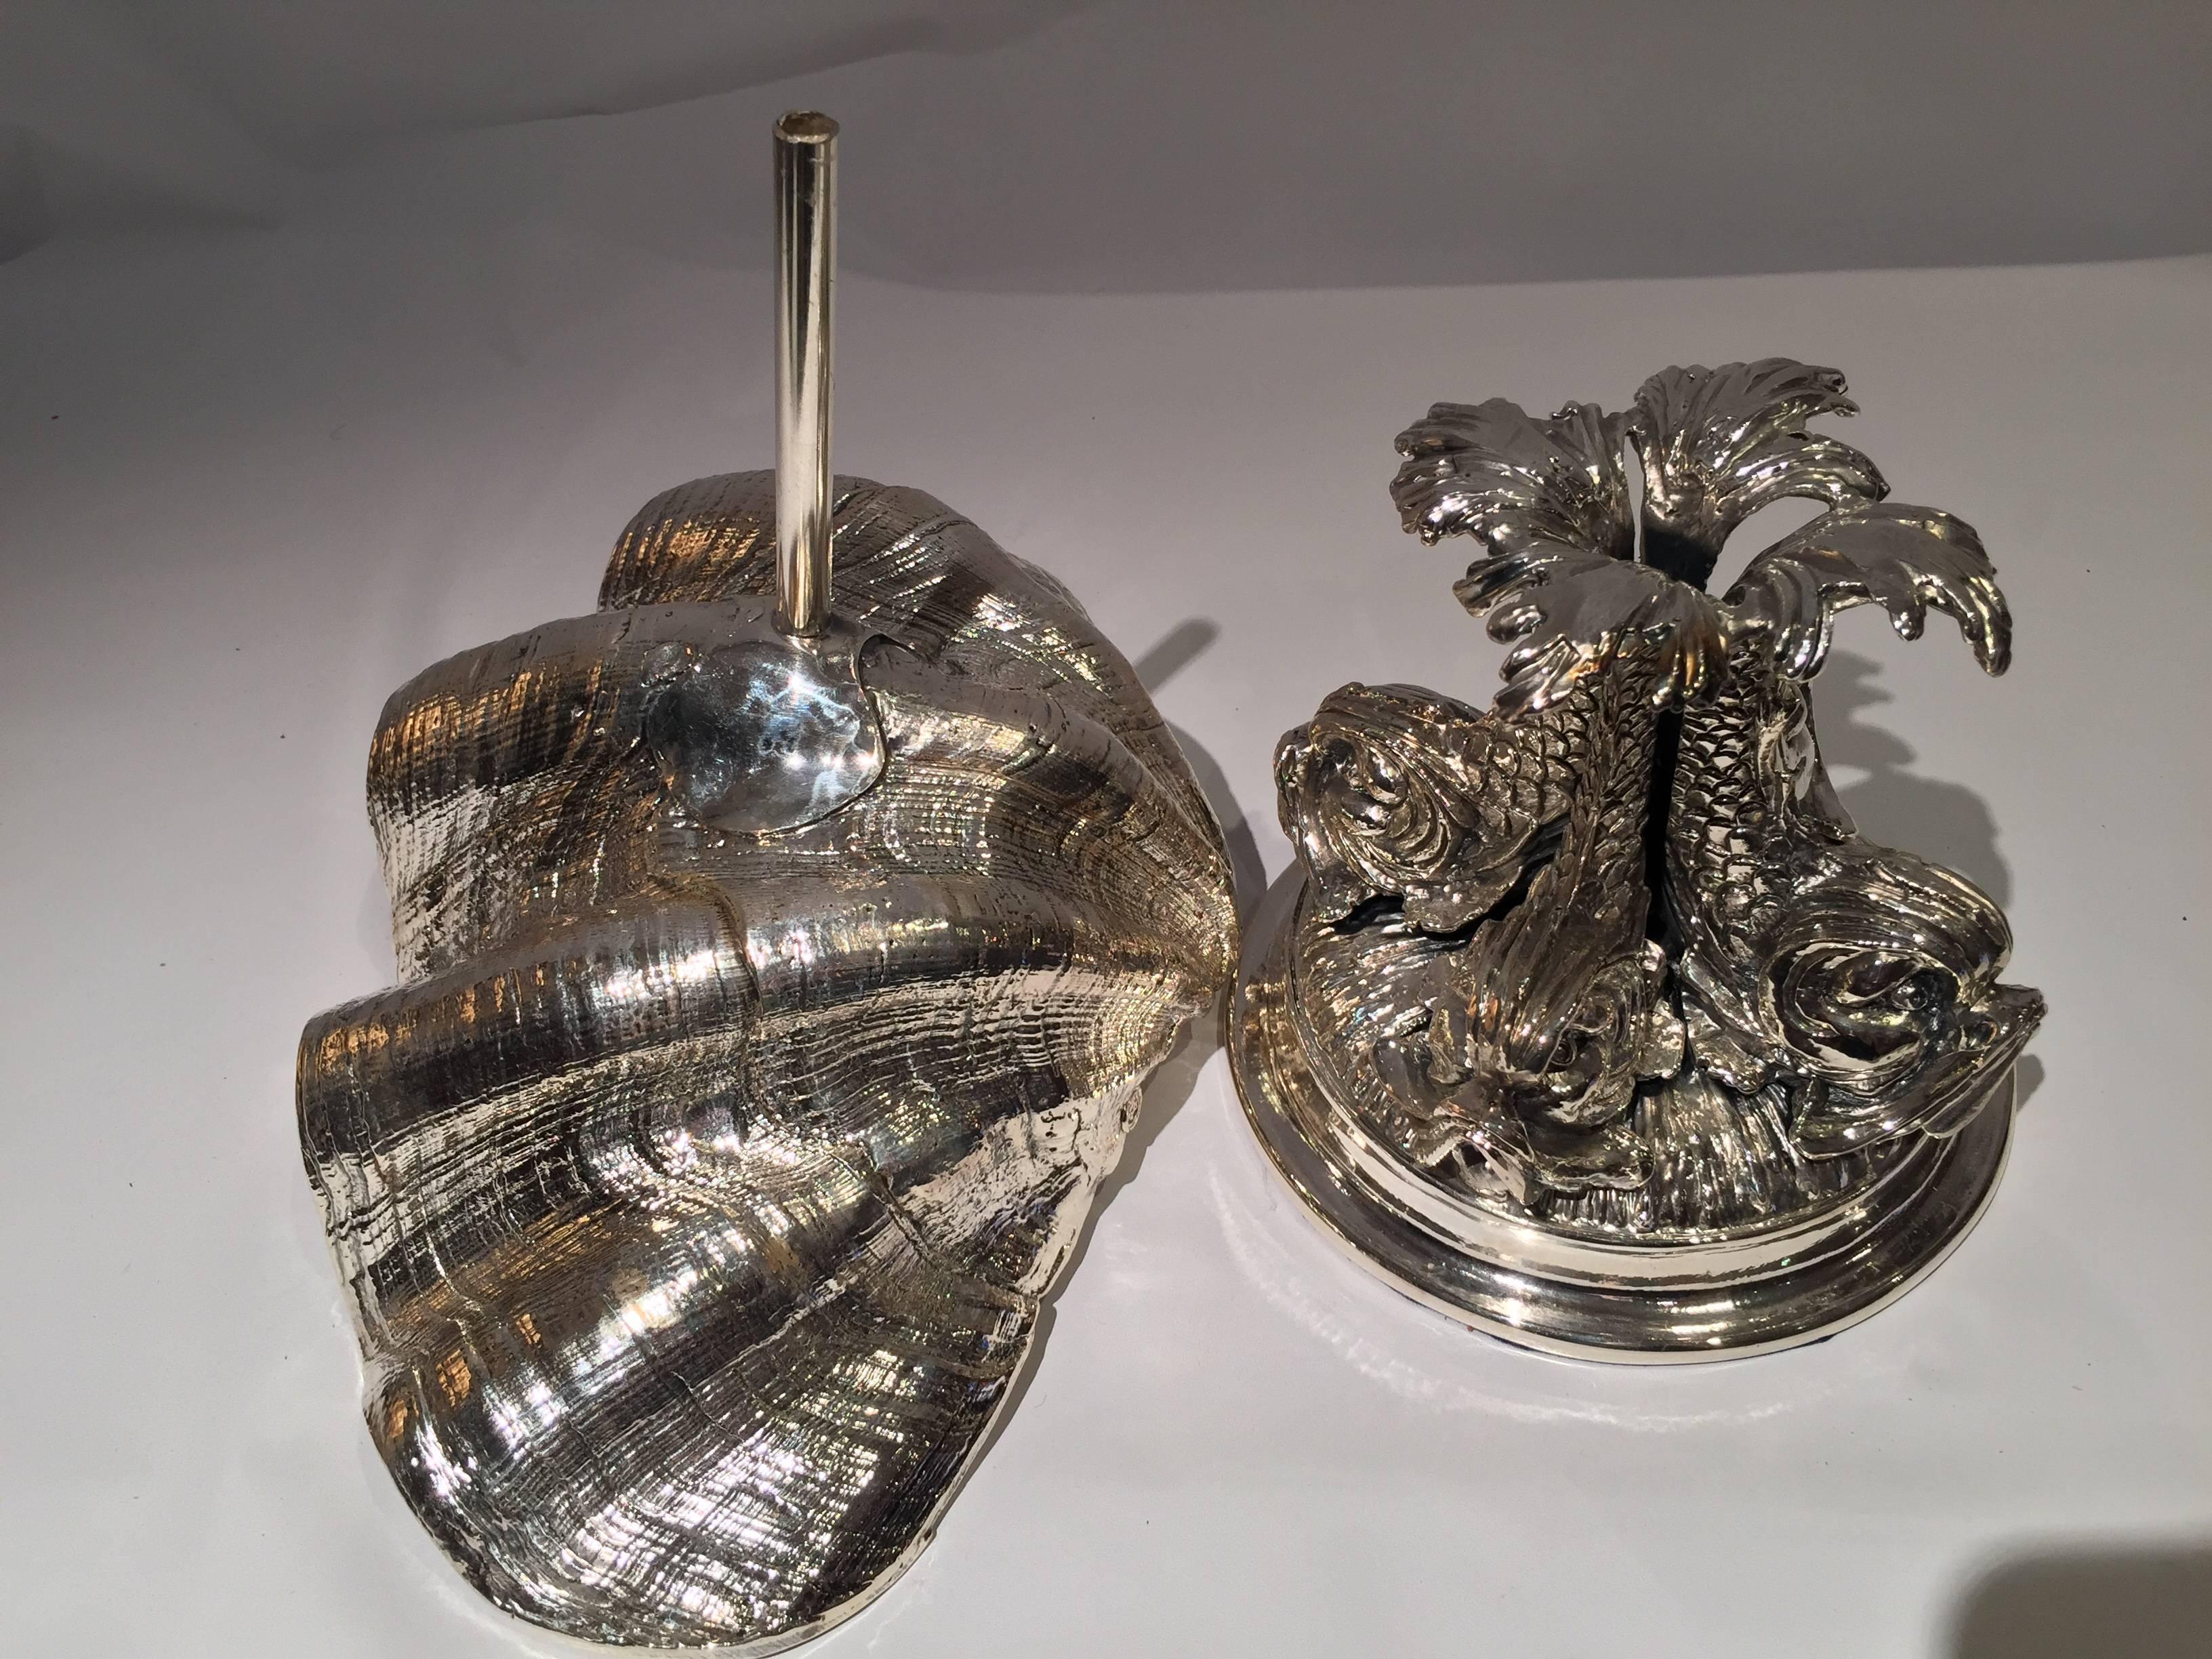 Creel and gow silvered resin clam shell mounted on a Cellini style triton base. This functional 925 Italian silver coated centrepiece is made in Rome.